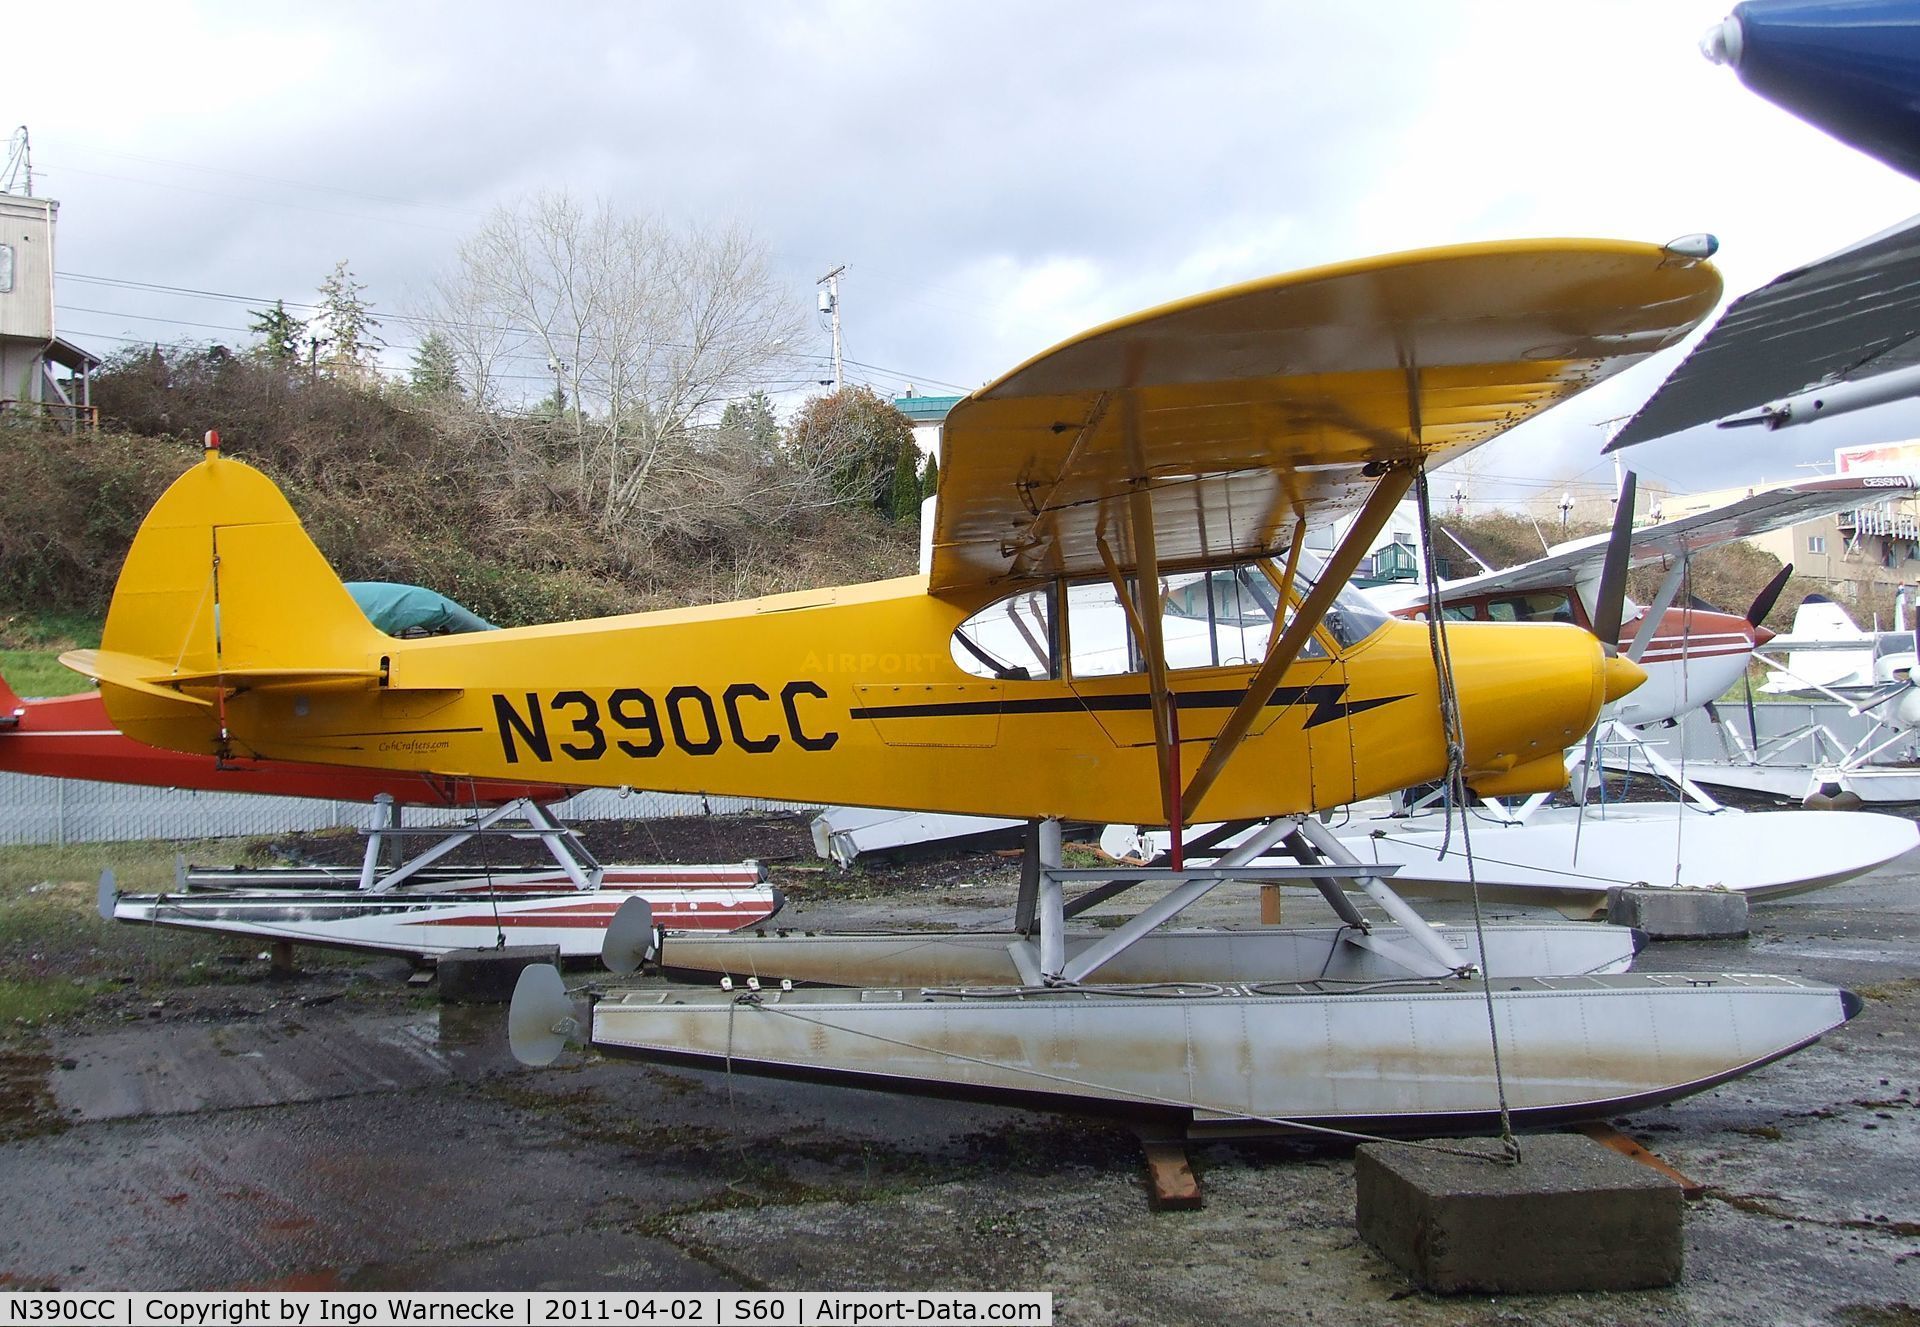 N390CC, 2002 Piper/cub Crafters PA-18-150 C/N 9944CC, Piper/Cub Crafters PA-18-150 Top Cub on floats at Kenmore Air Harbor, Kenmore WA